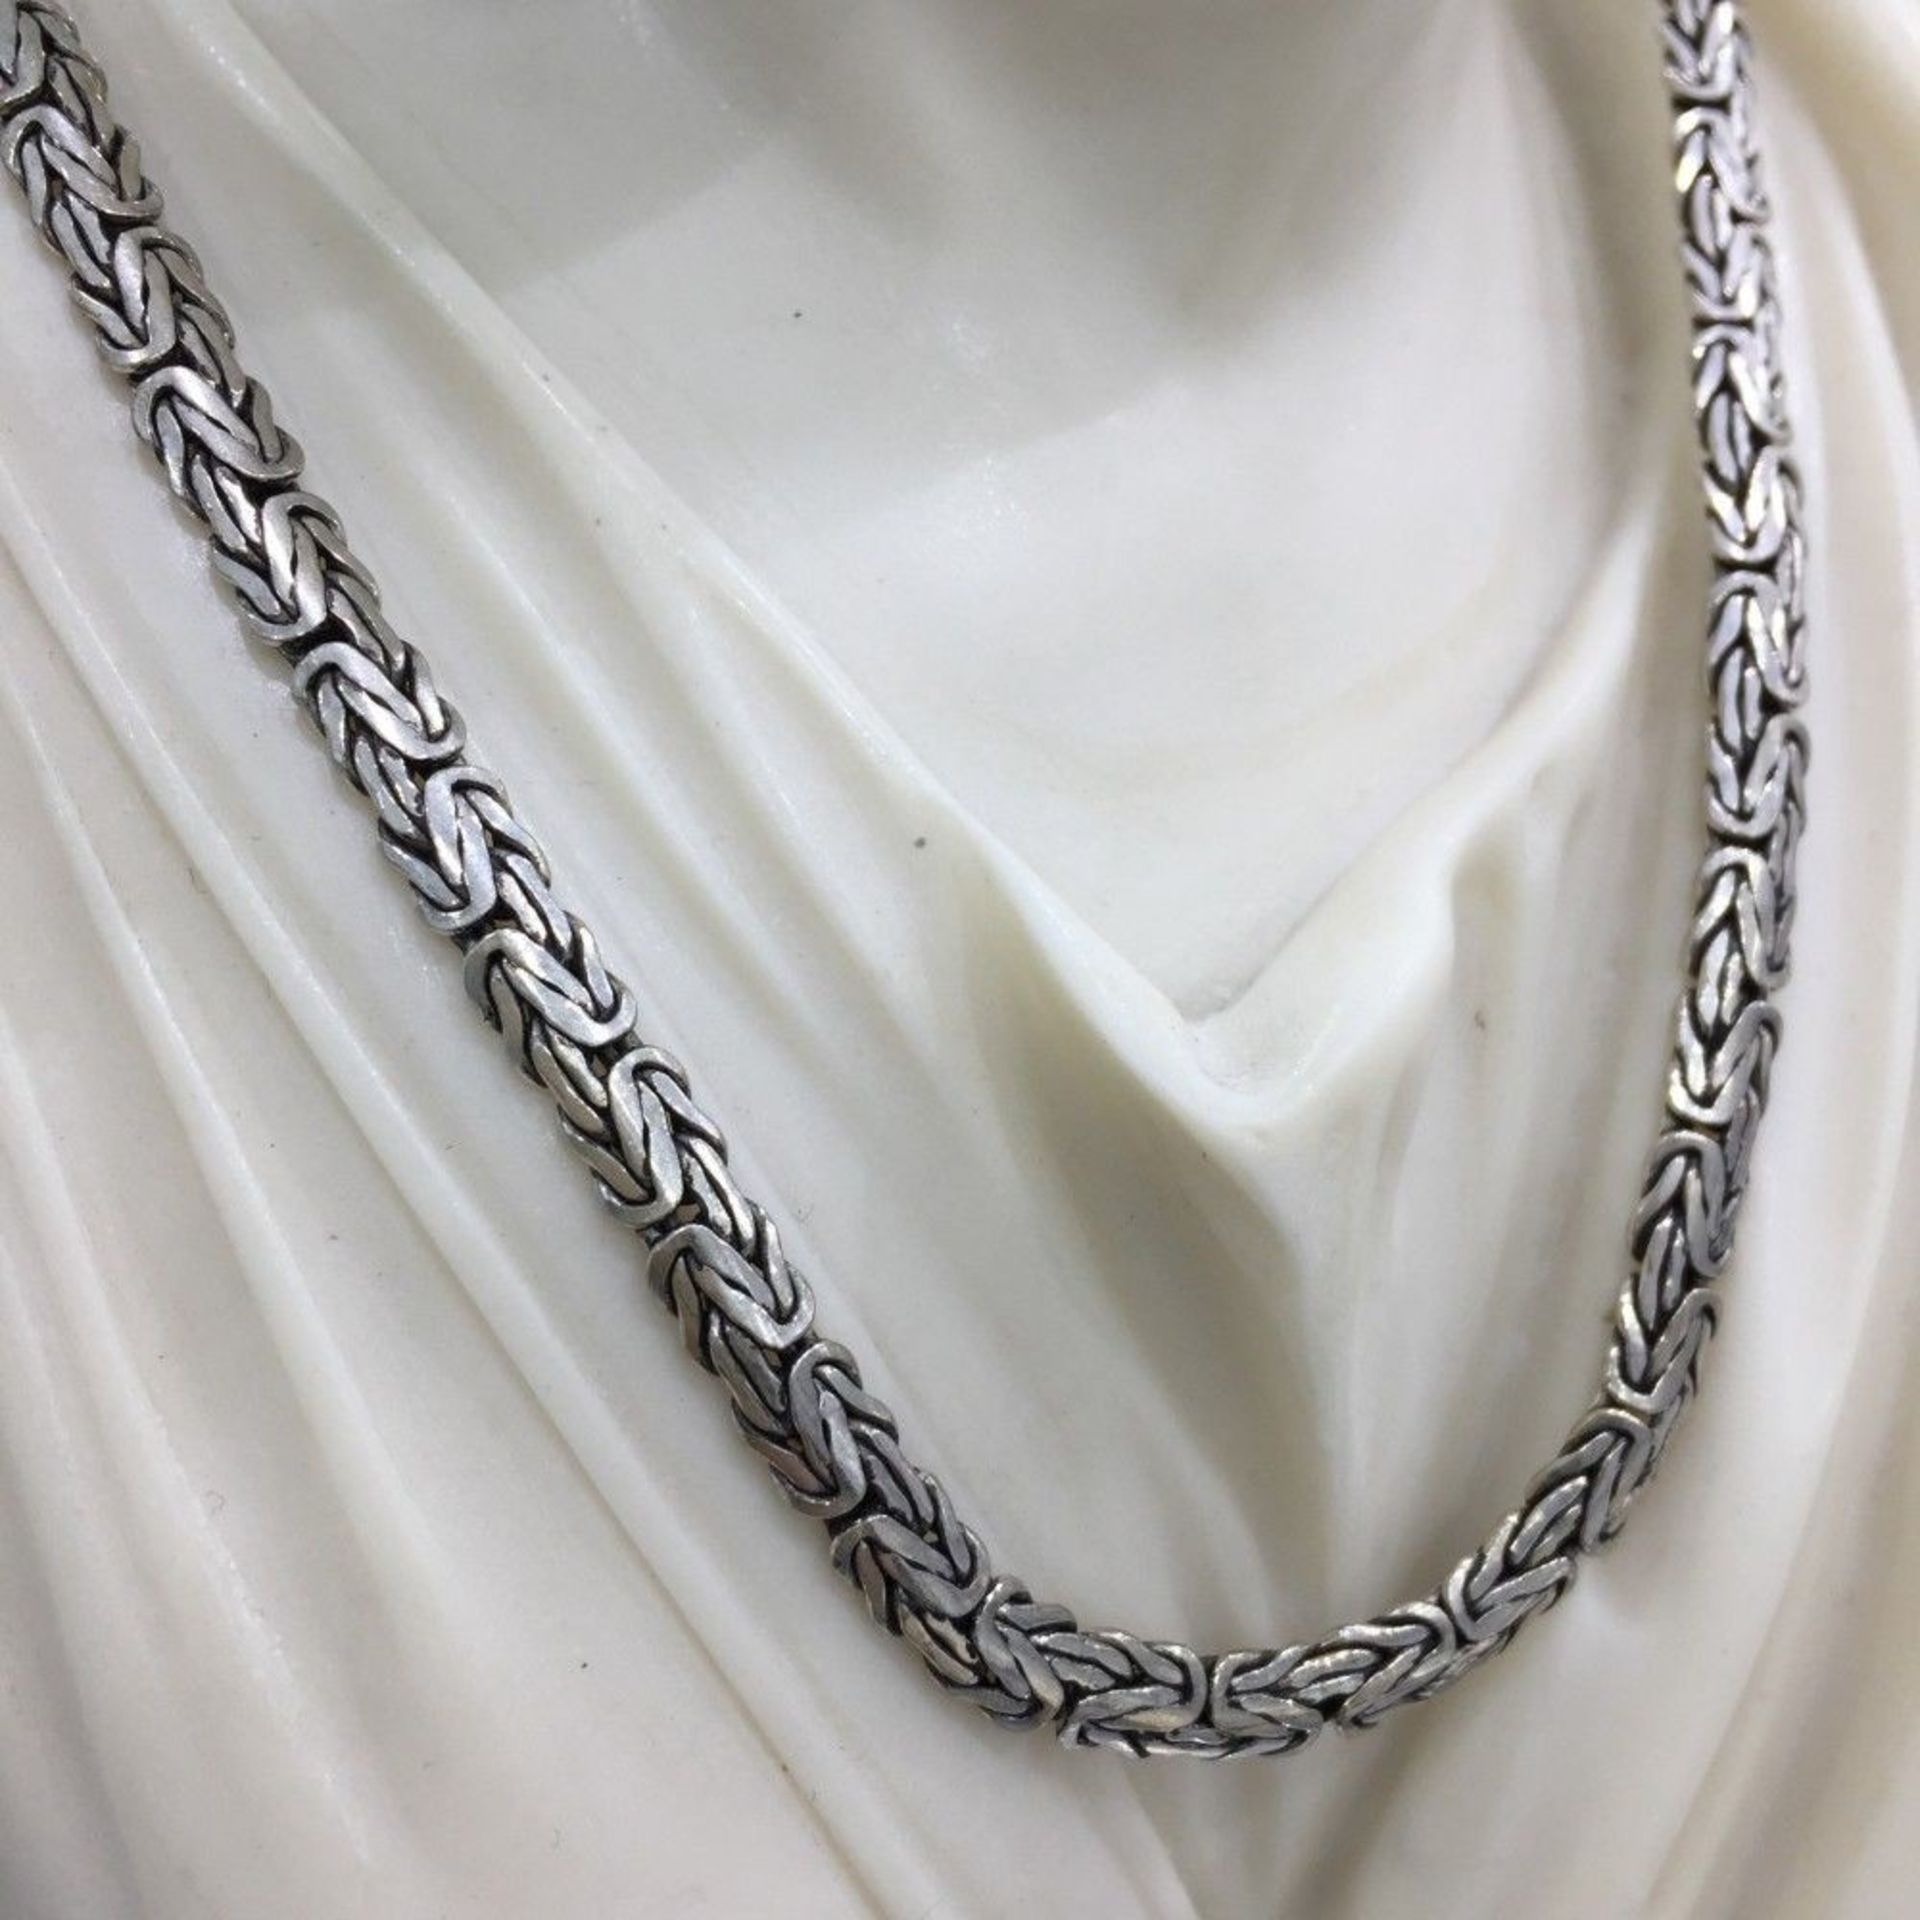 65 Cm / 26 In Men's Bali King Byzantine Chain Necklace 925 Sterling Silver - Image 3 of 4